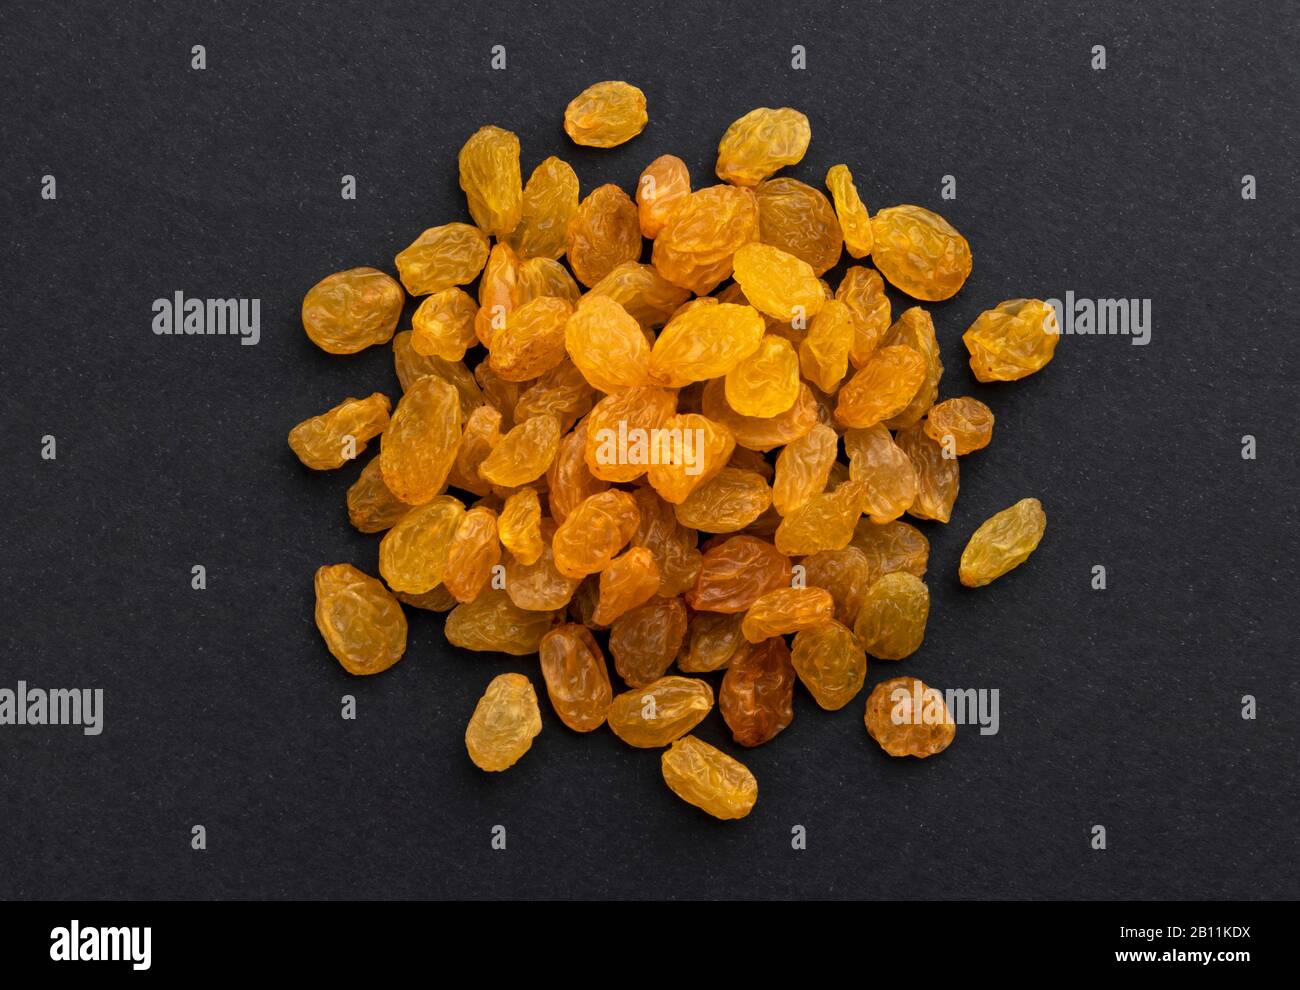 Pile of dried yellow raisins on black background, top view Stock Photo